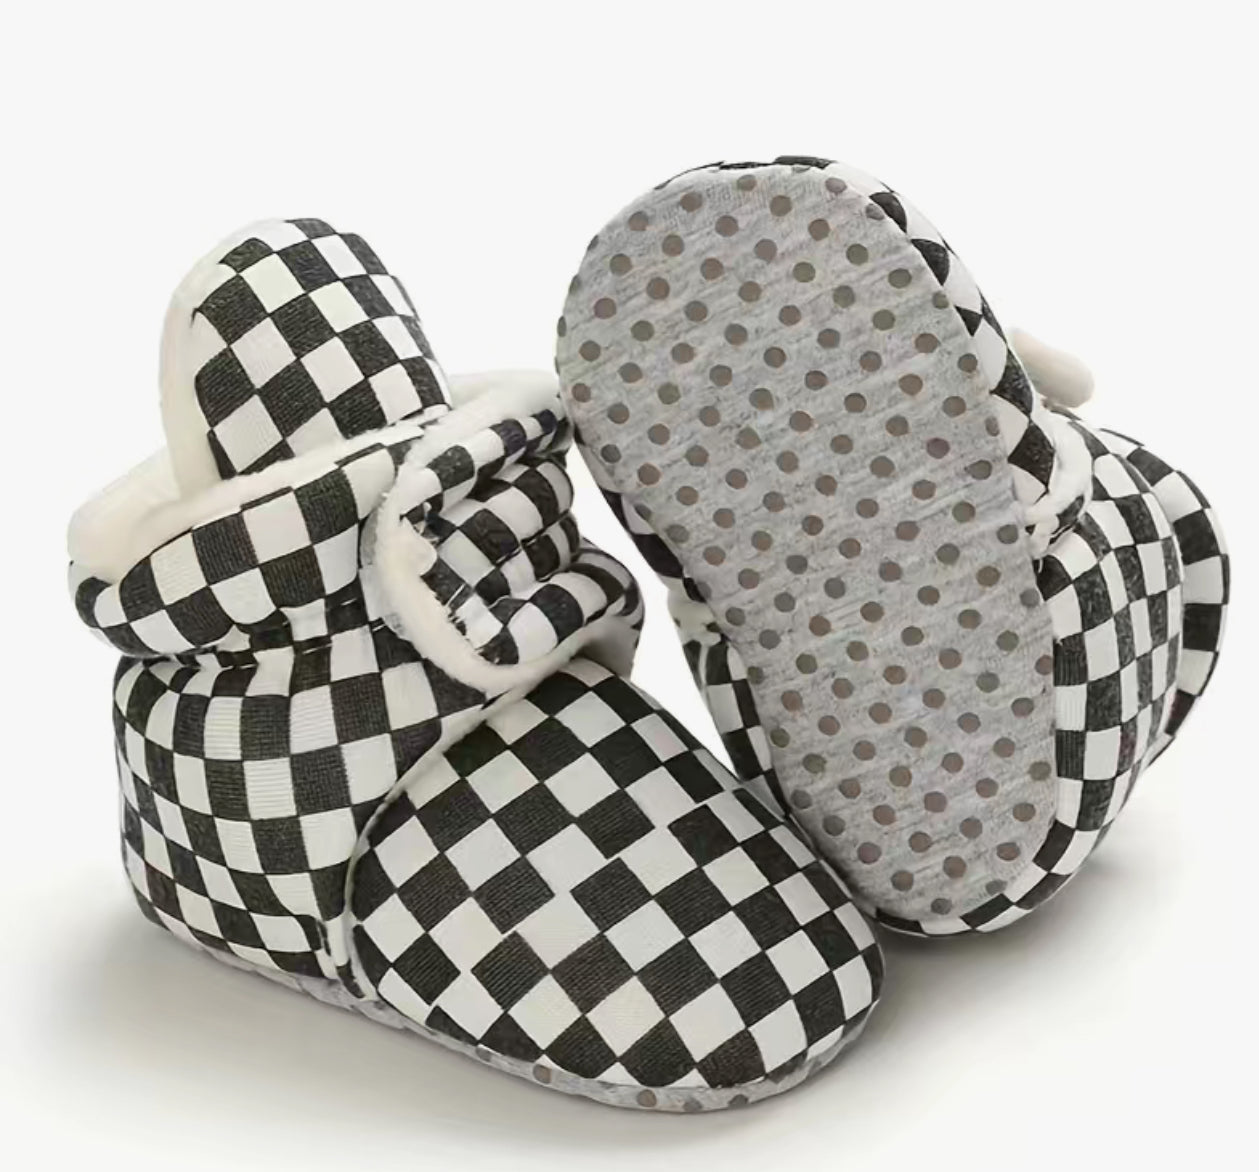 Checkered booties